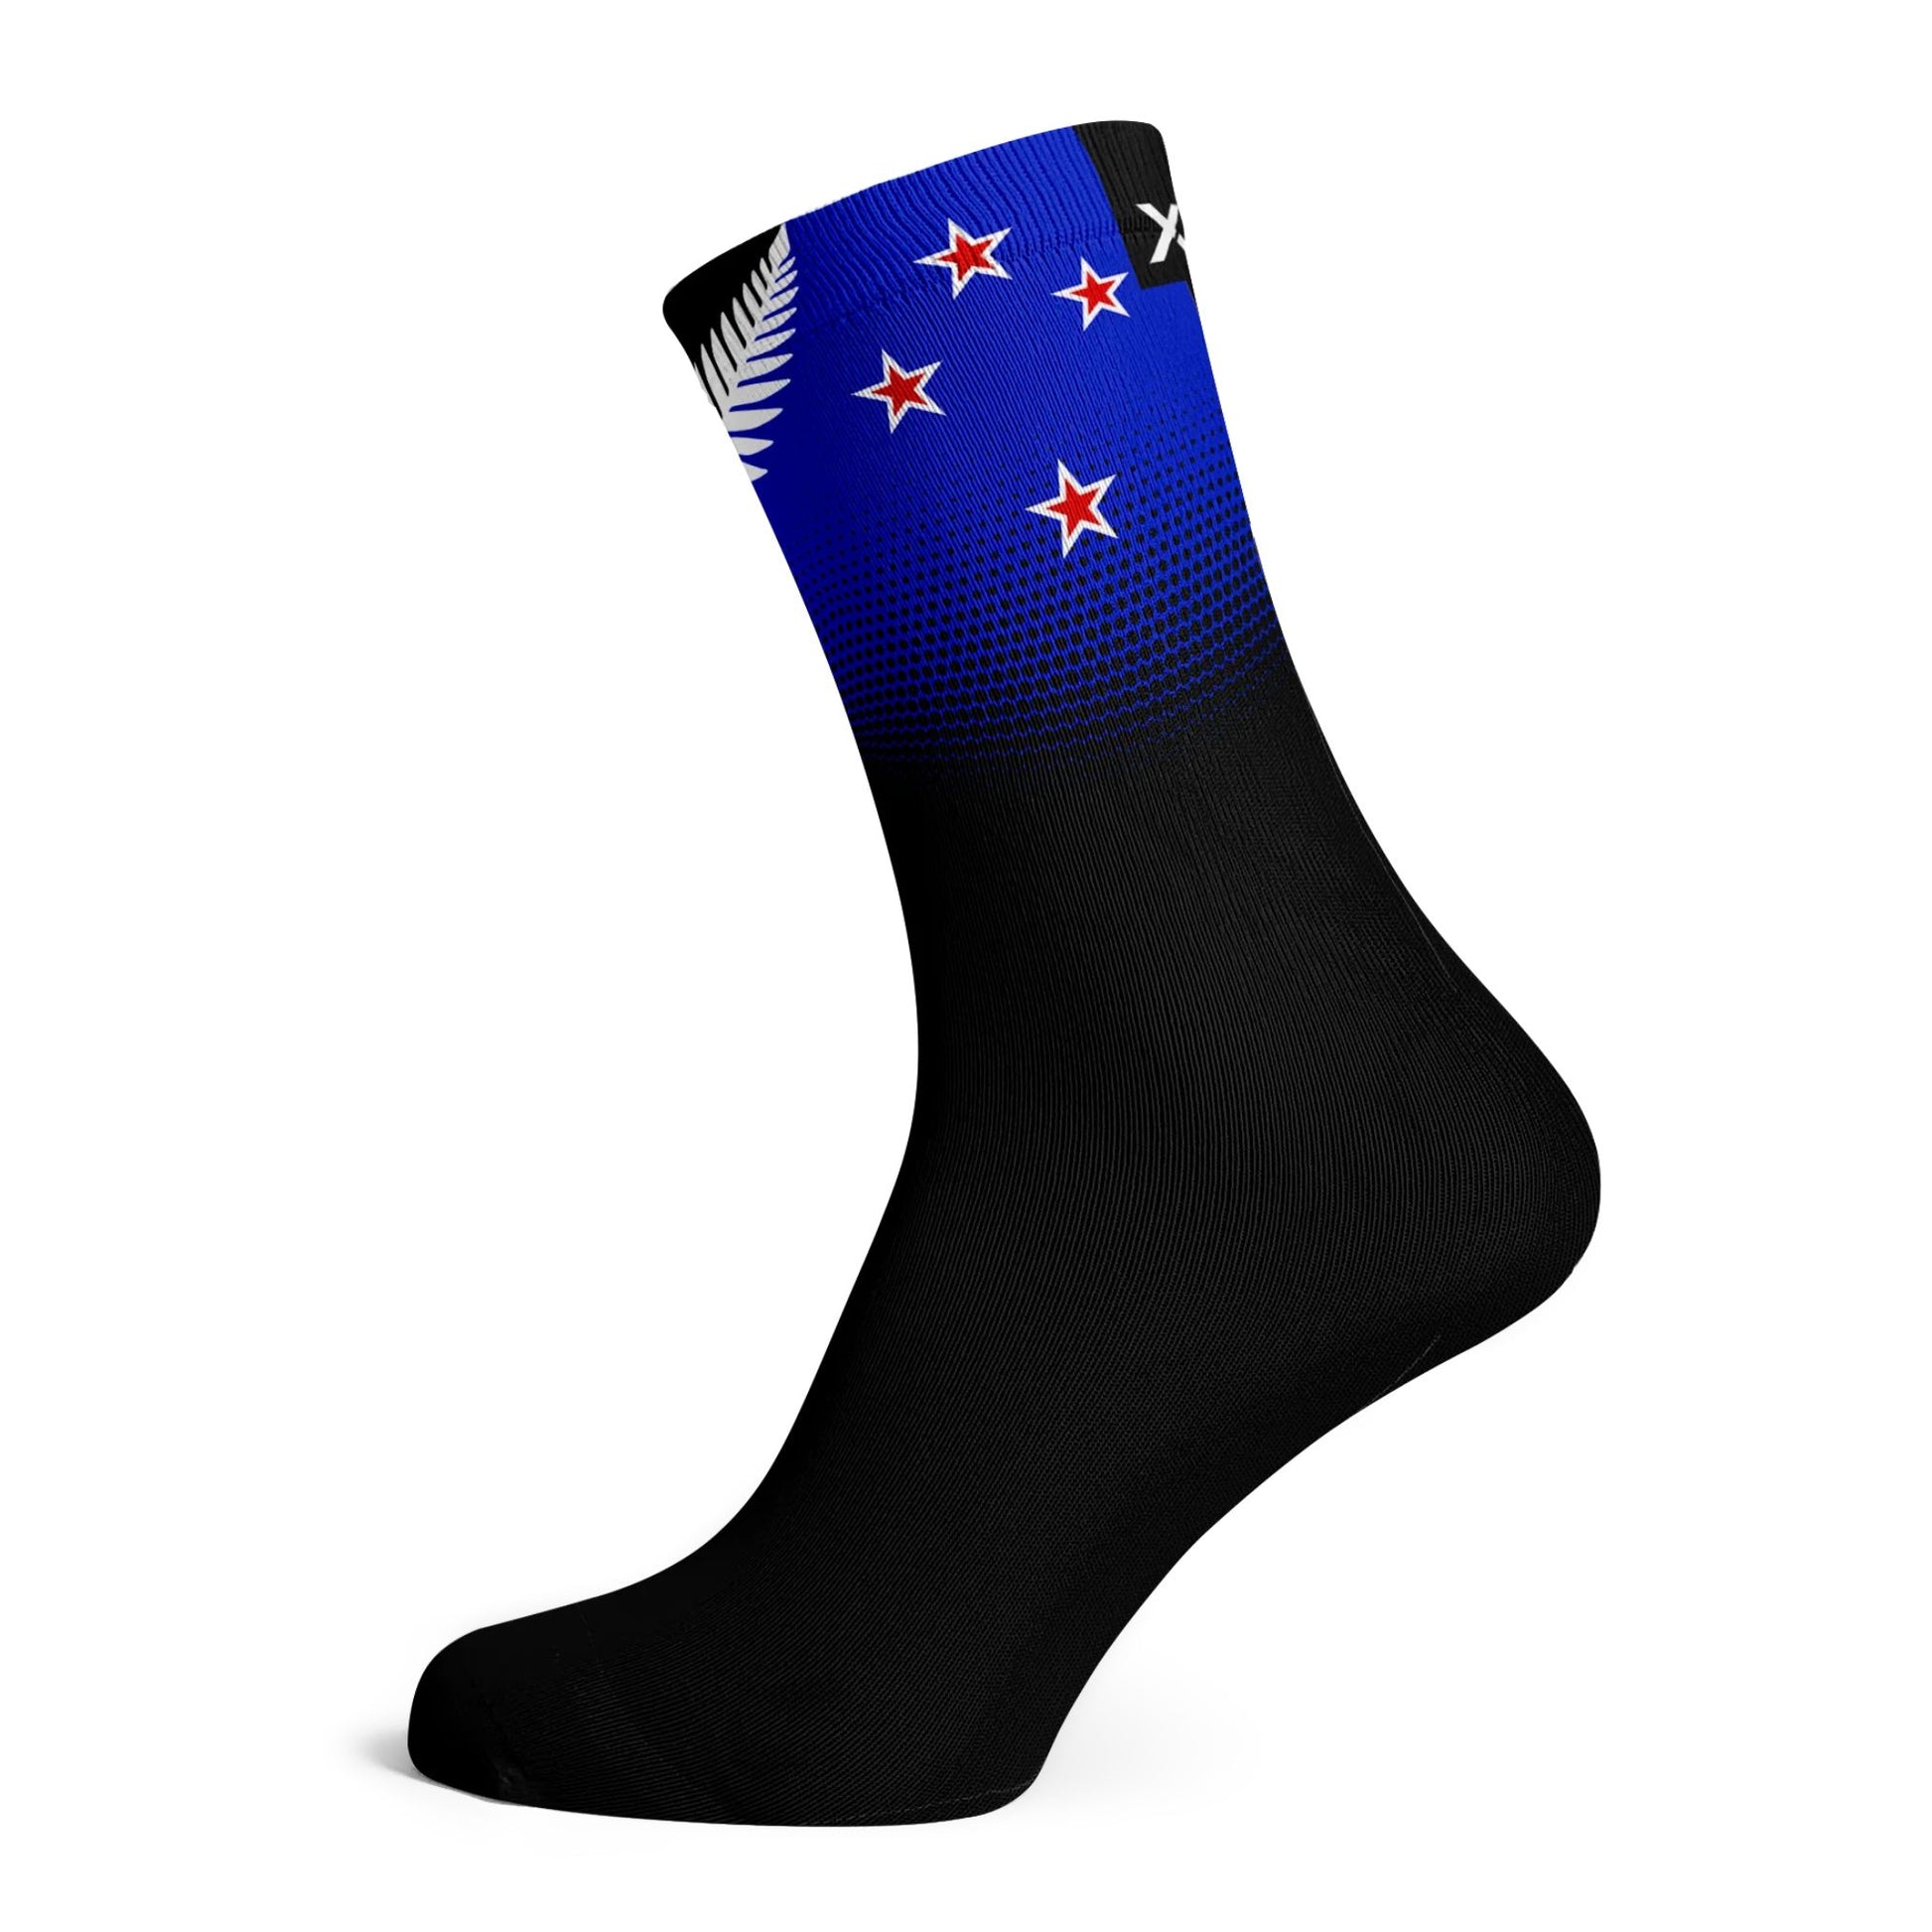 New Zealand Silver Fern Black Sock on white background with blue band and southern cross stars